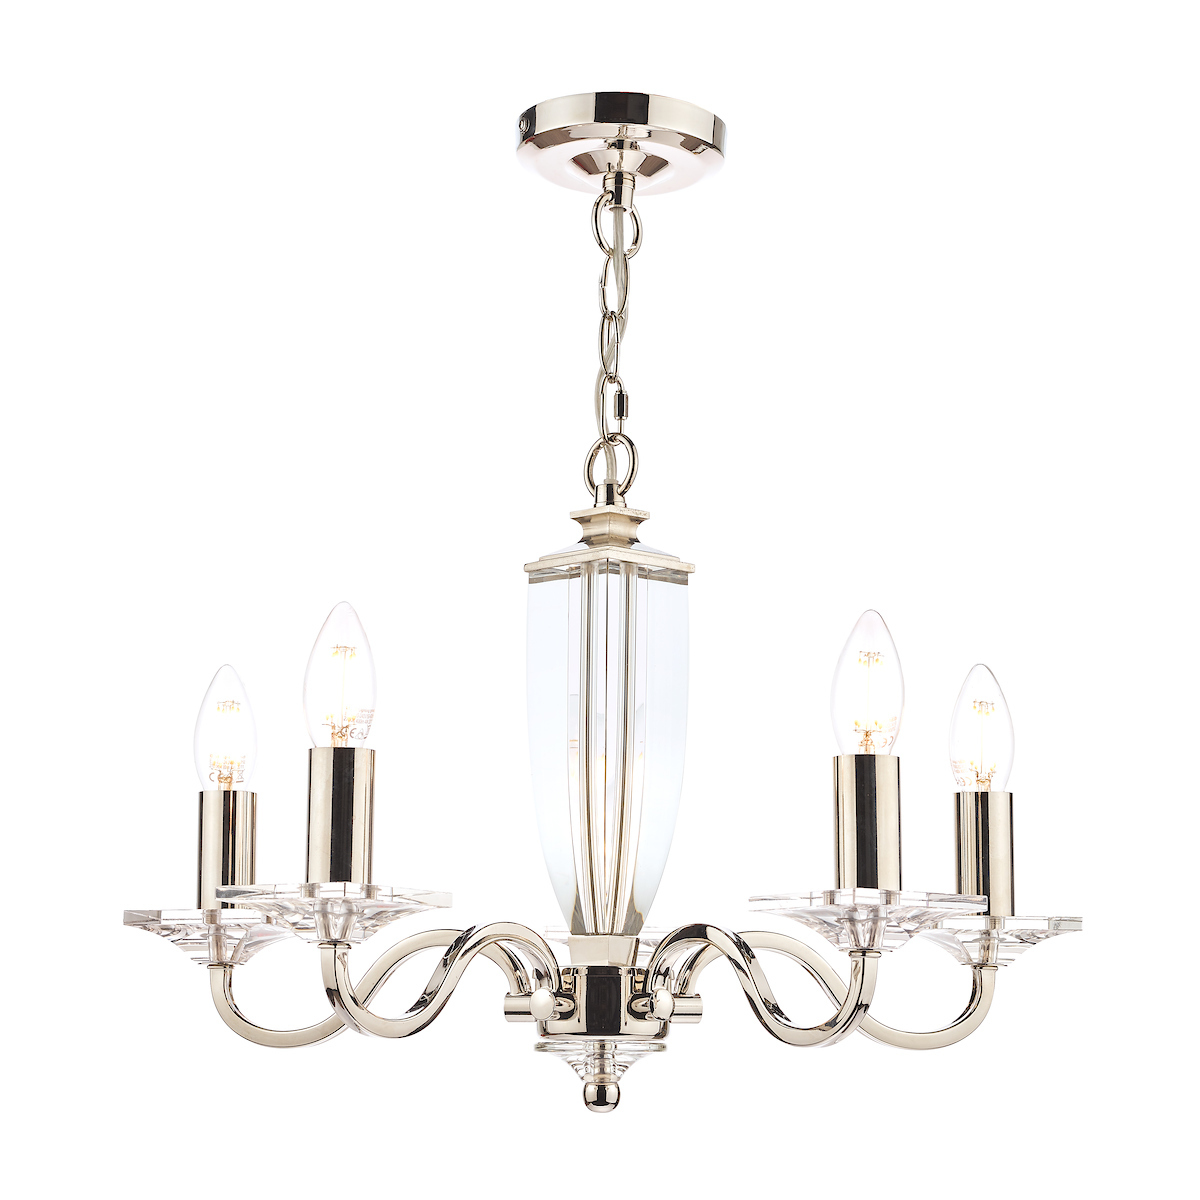 Laura Ashley Carson Cut Glass and Polished Nickel 5 Light Chandelier